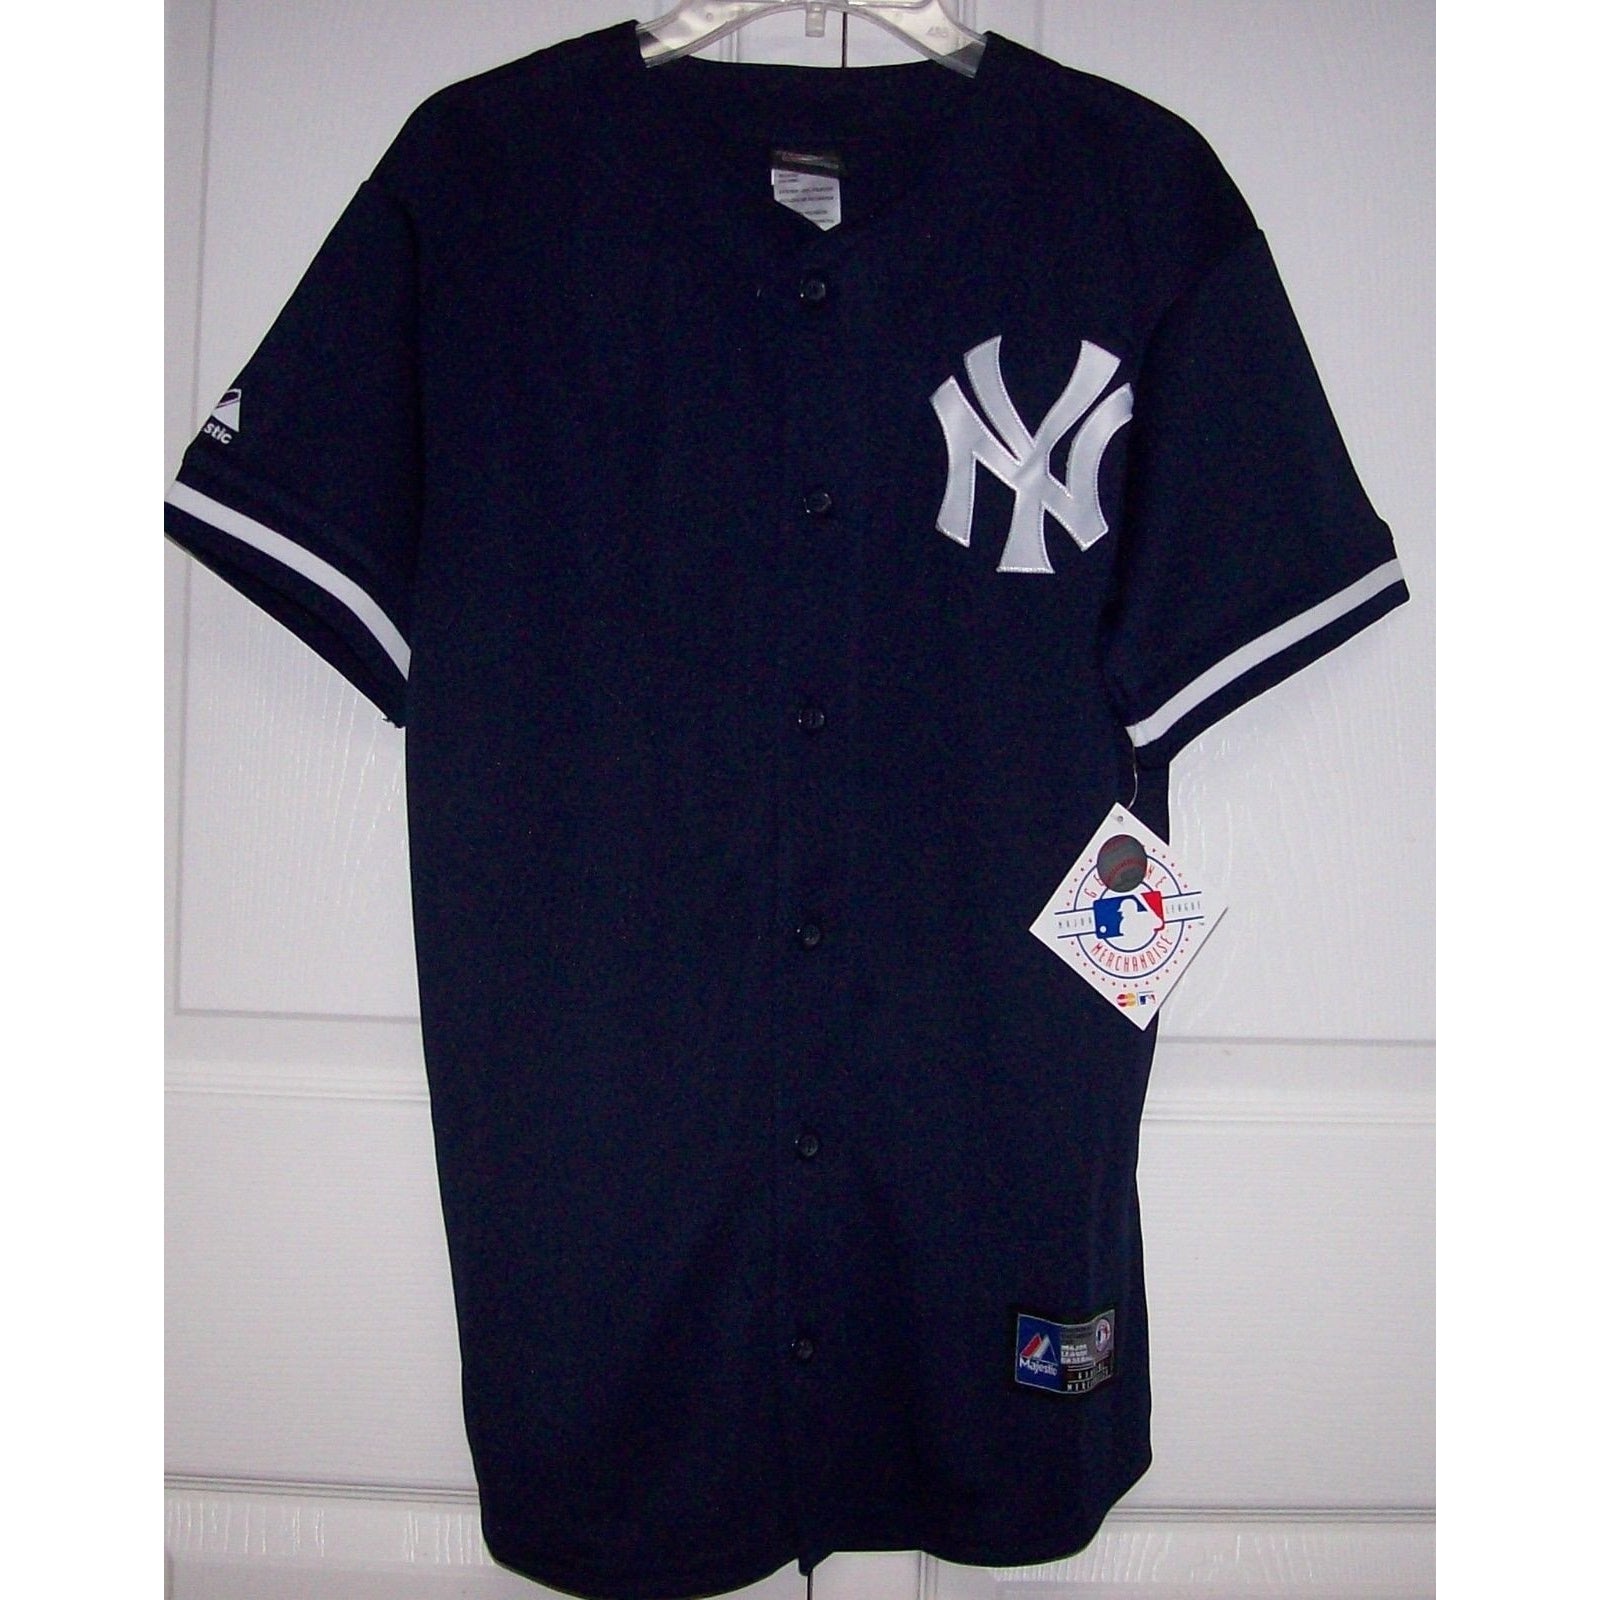 New York Yankees Girls Pink Personalized Jersey